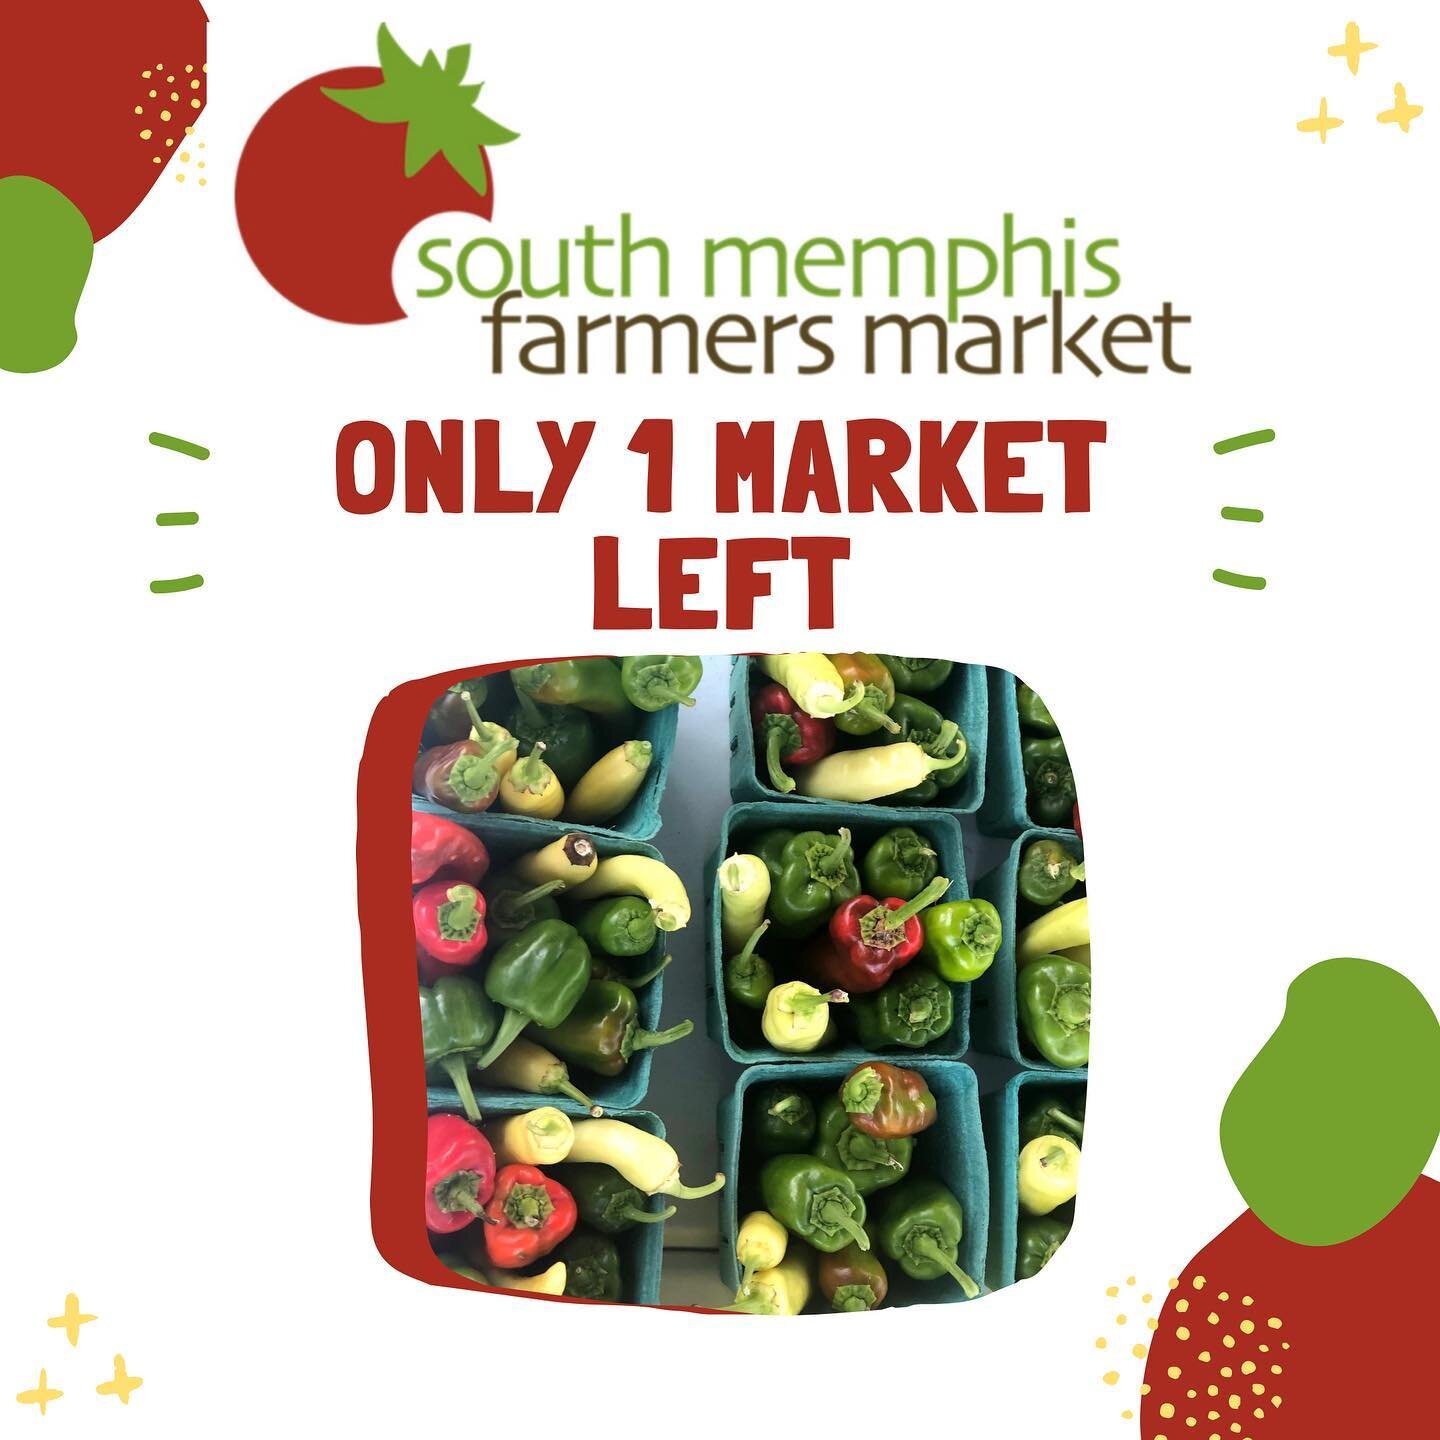 We only have ONE more market day left of our summer season! Come on out this THURSDAY and buy some delicious fruits and vegetables! We will be open from 8:00 am to 1:00 pm.